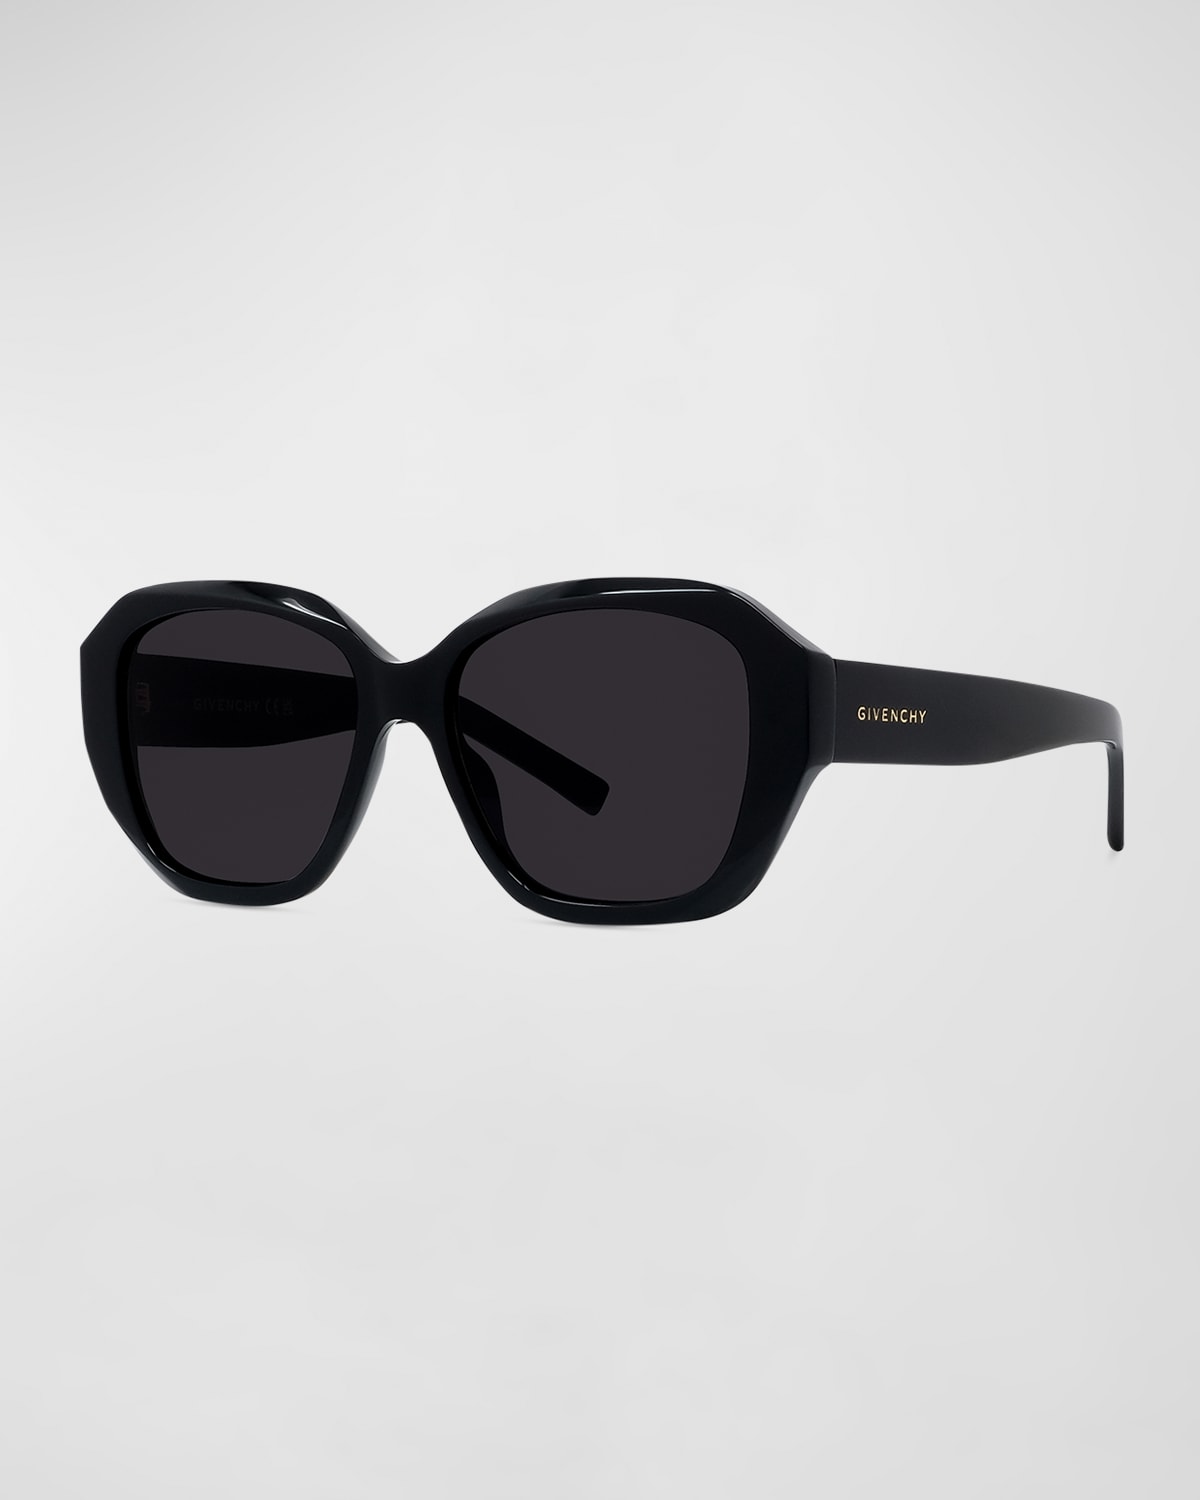 GIVENCHY GV DAY ACETATE SQUARE SUNGLASSES